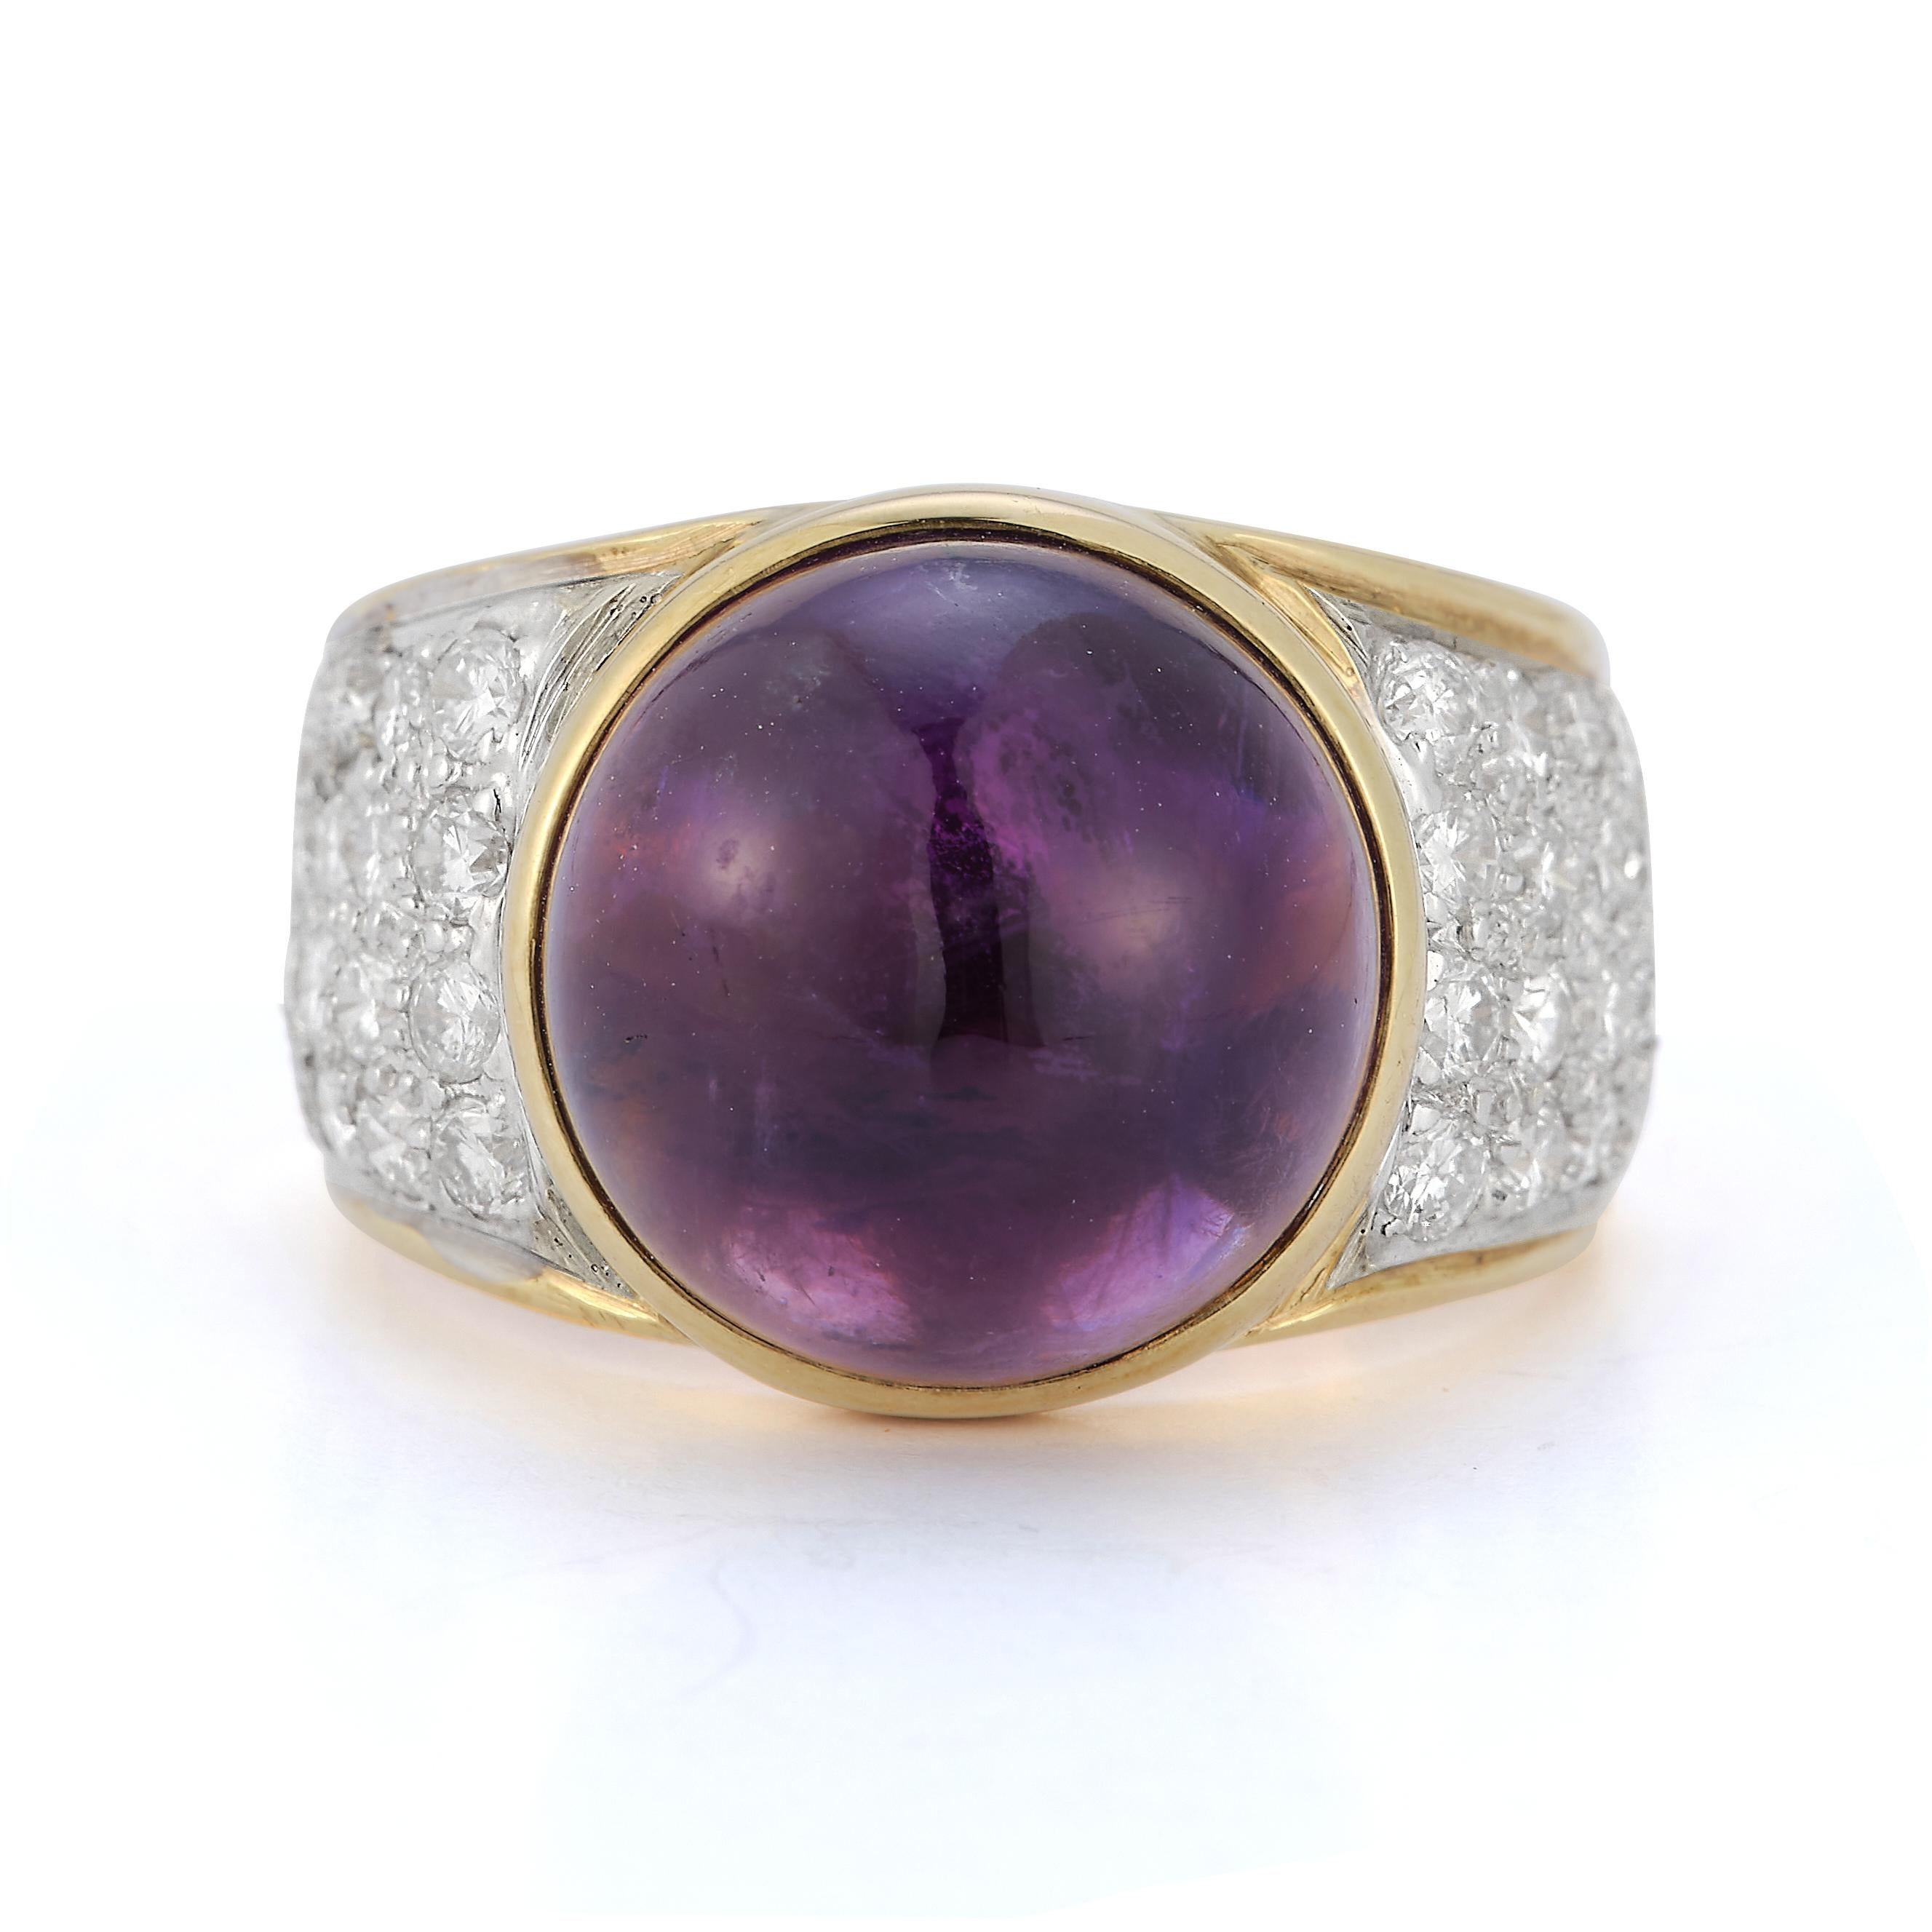 Cabochon Amethyst Ring gold ring with a central cabochon amethyst flanked and accented by 32 round diamonds

Cabochon Amethyst approximate weight: 9.75ct

Diamonds total approximate weight: 1.22ct

14 karat gold

Ring size: 7.5
Resizable free of